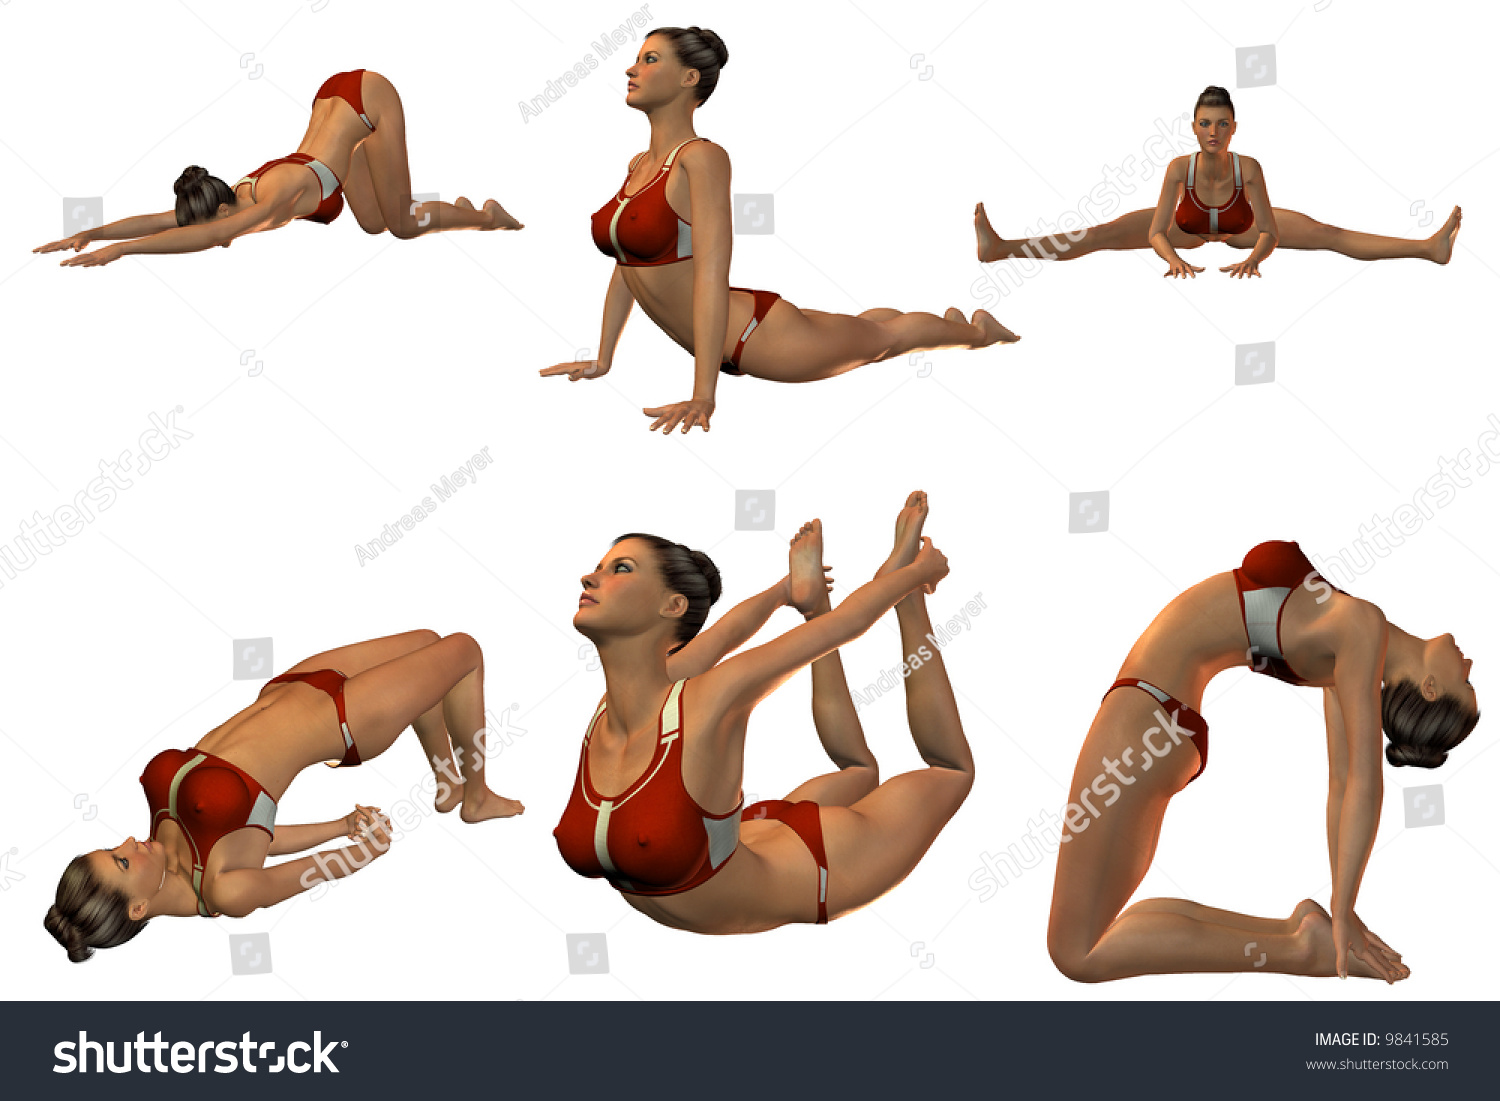 Yoga poses in Poses Photo Stock yoga 9841585  Shutterstock japanese Sexy :